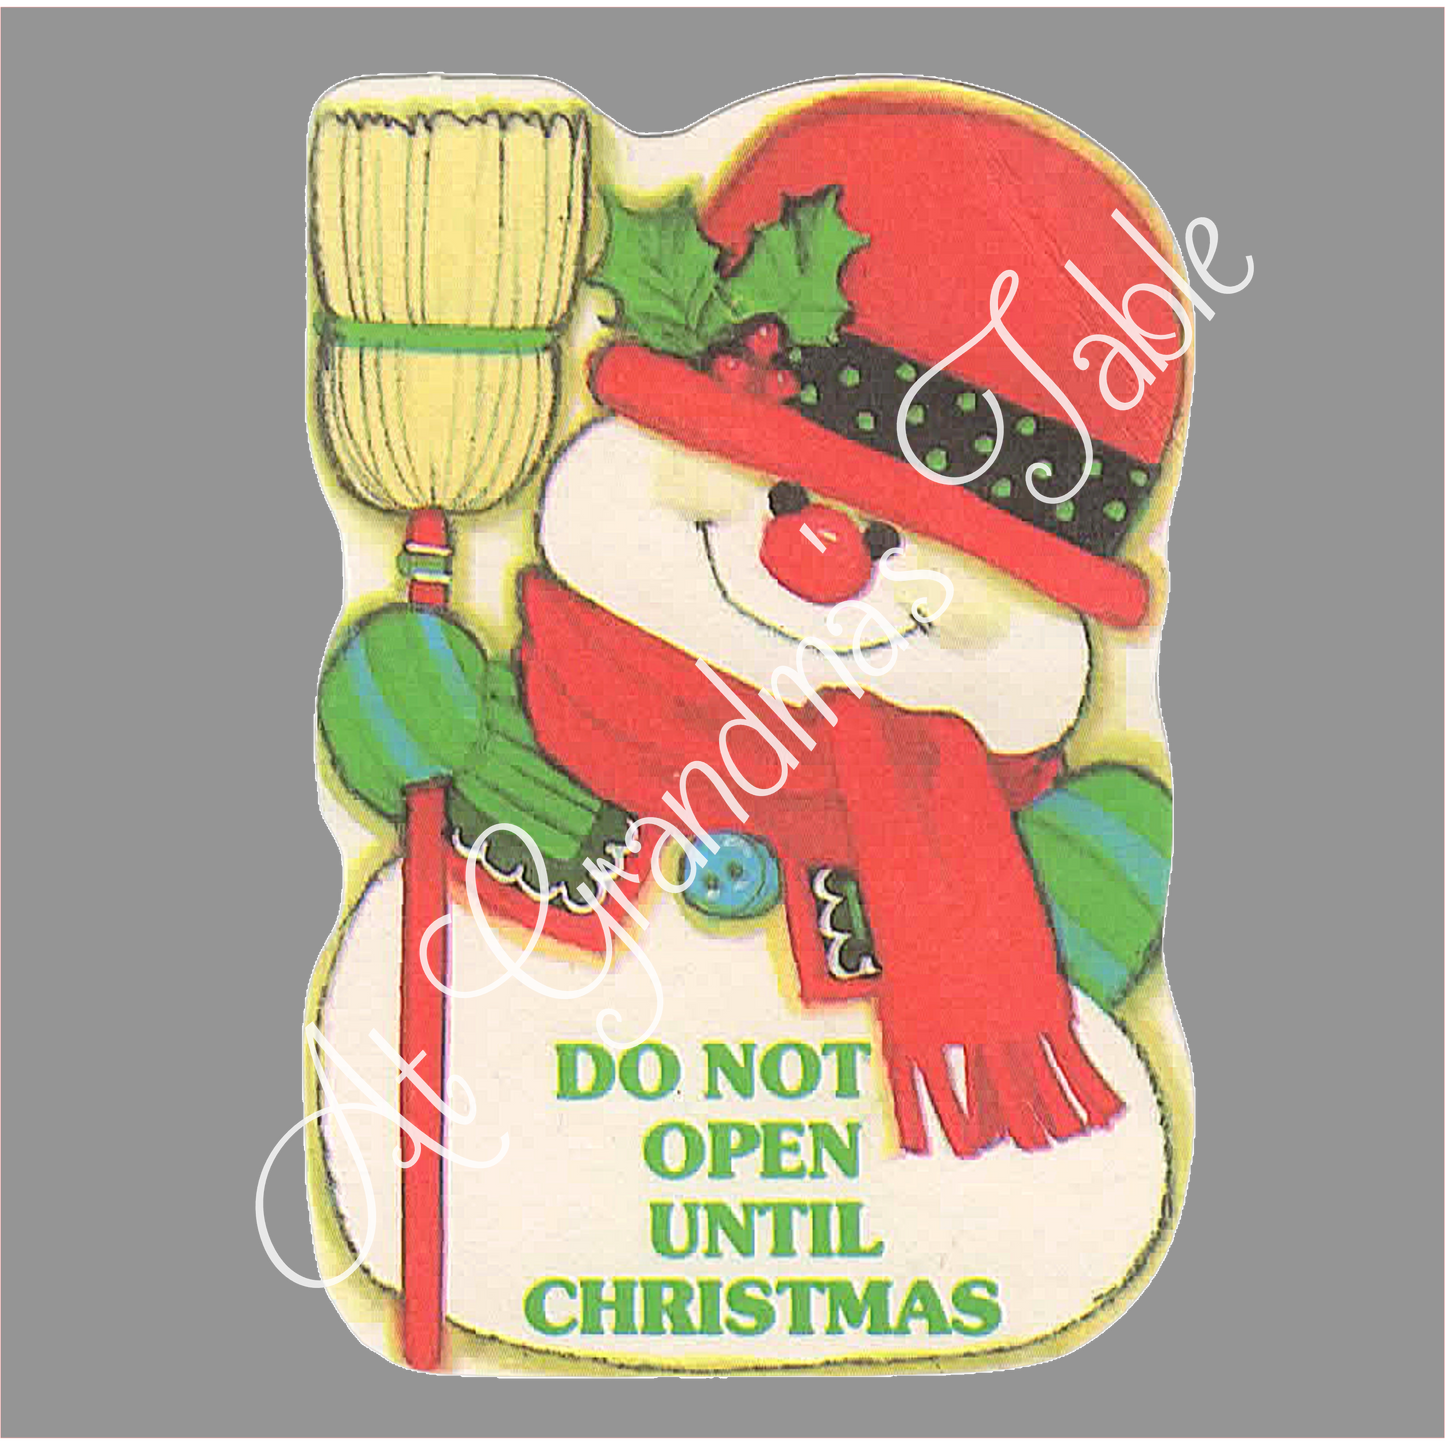 Vintage Snowman with Broom and Red Hat Graphic Do Not Open Before Christmas Download Art Gift Tag